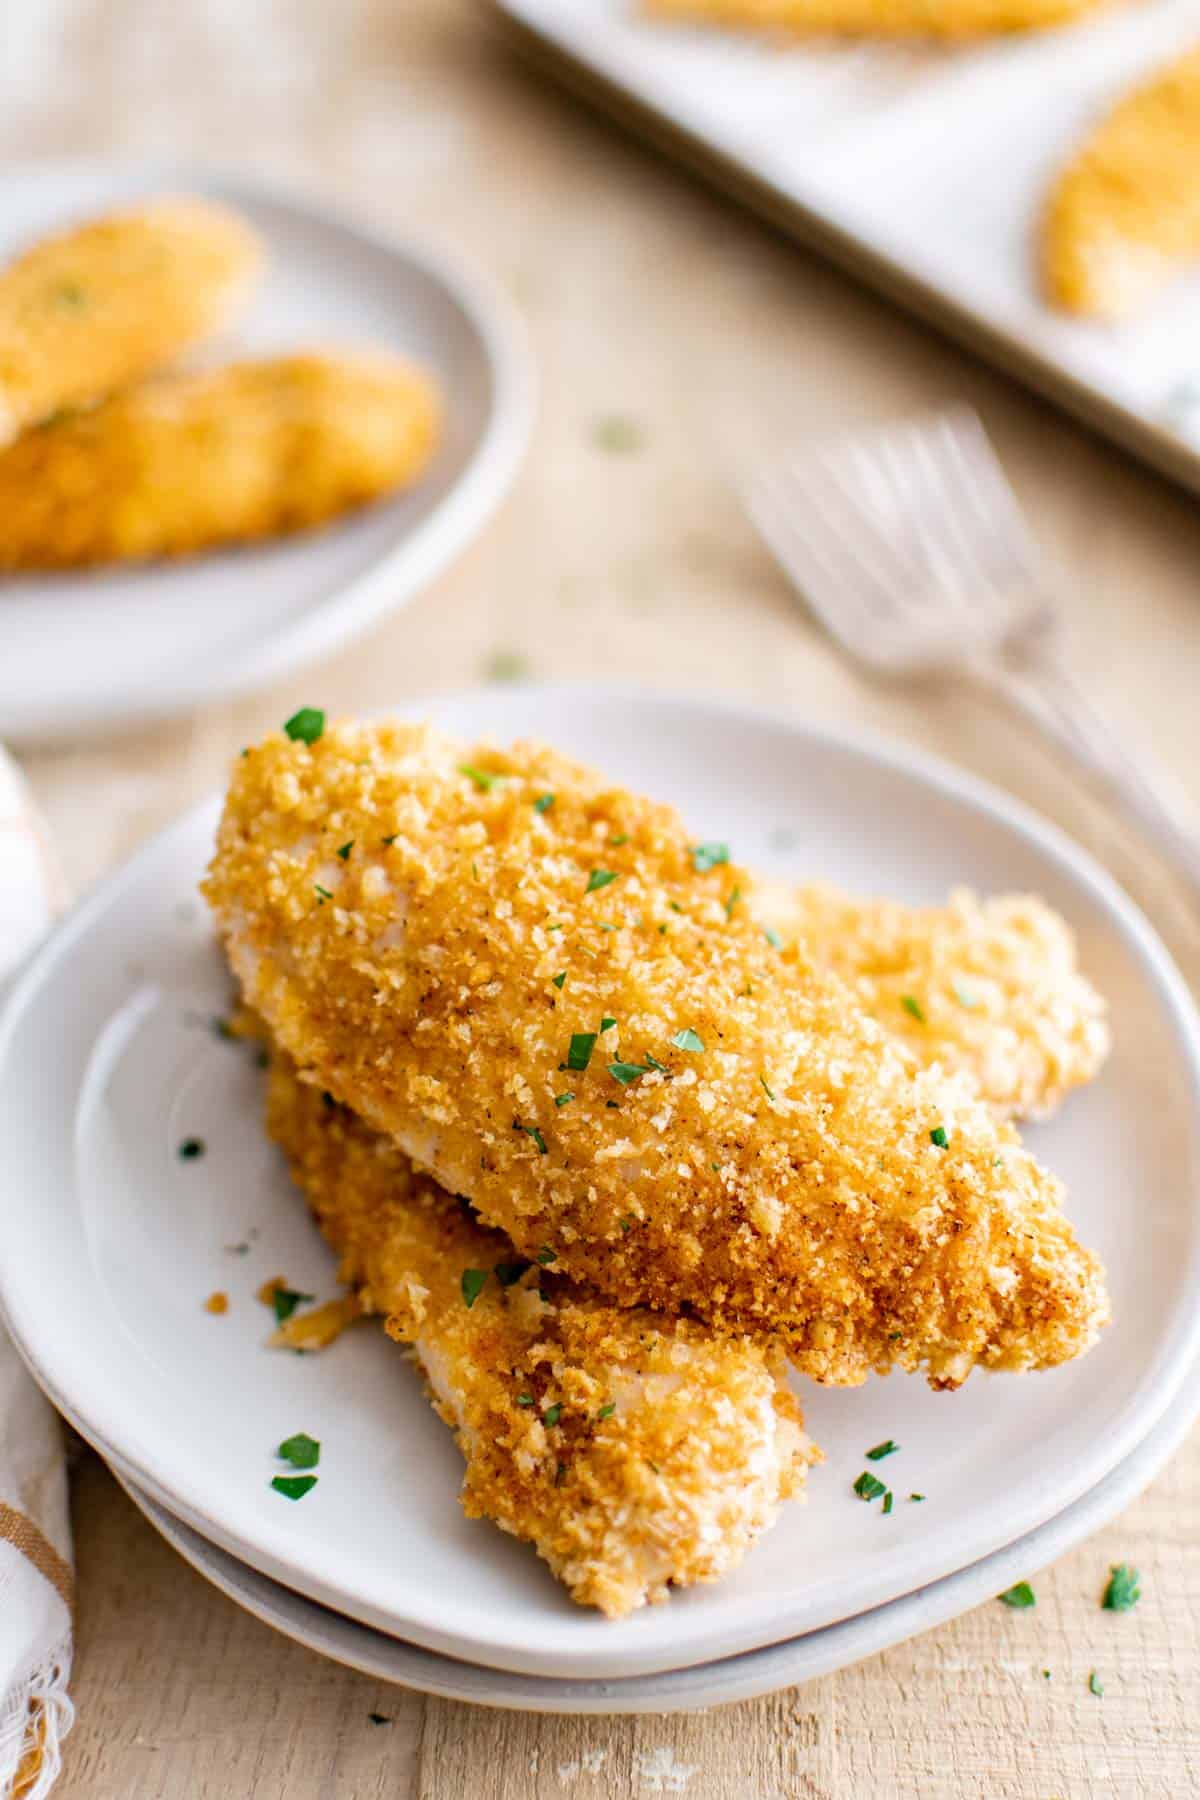 the finished baked chicken tenders served on a white plate